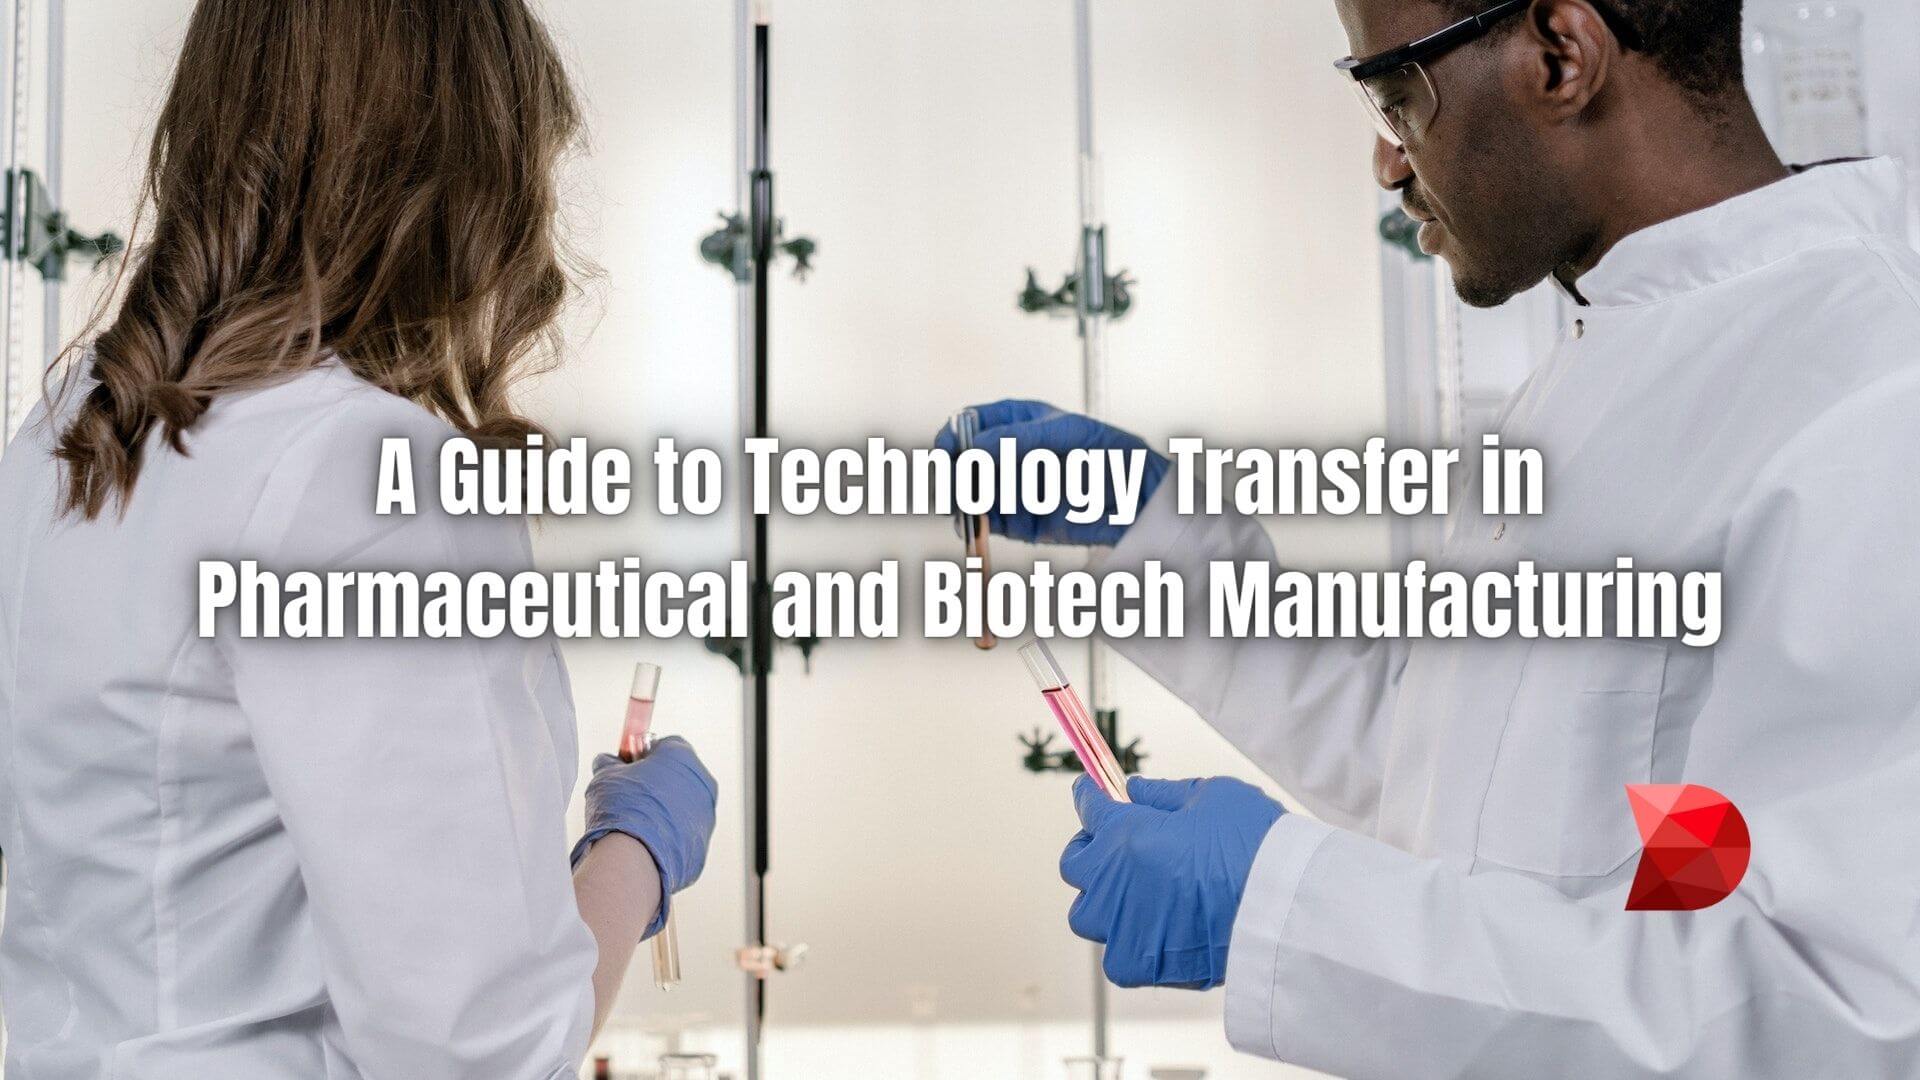 Unraveling the complex pharmaceutical and biotech manufacturing tapestry, one thread stands out—technology transfer. Learn more!